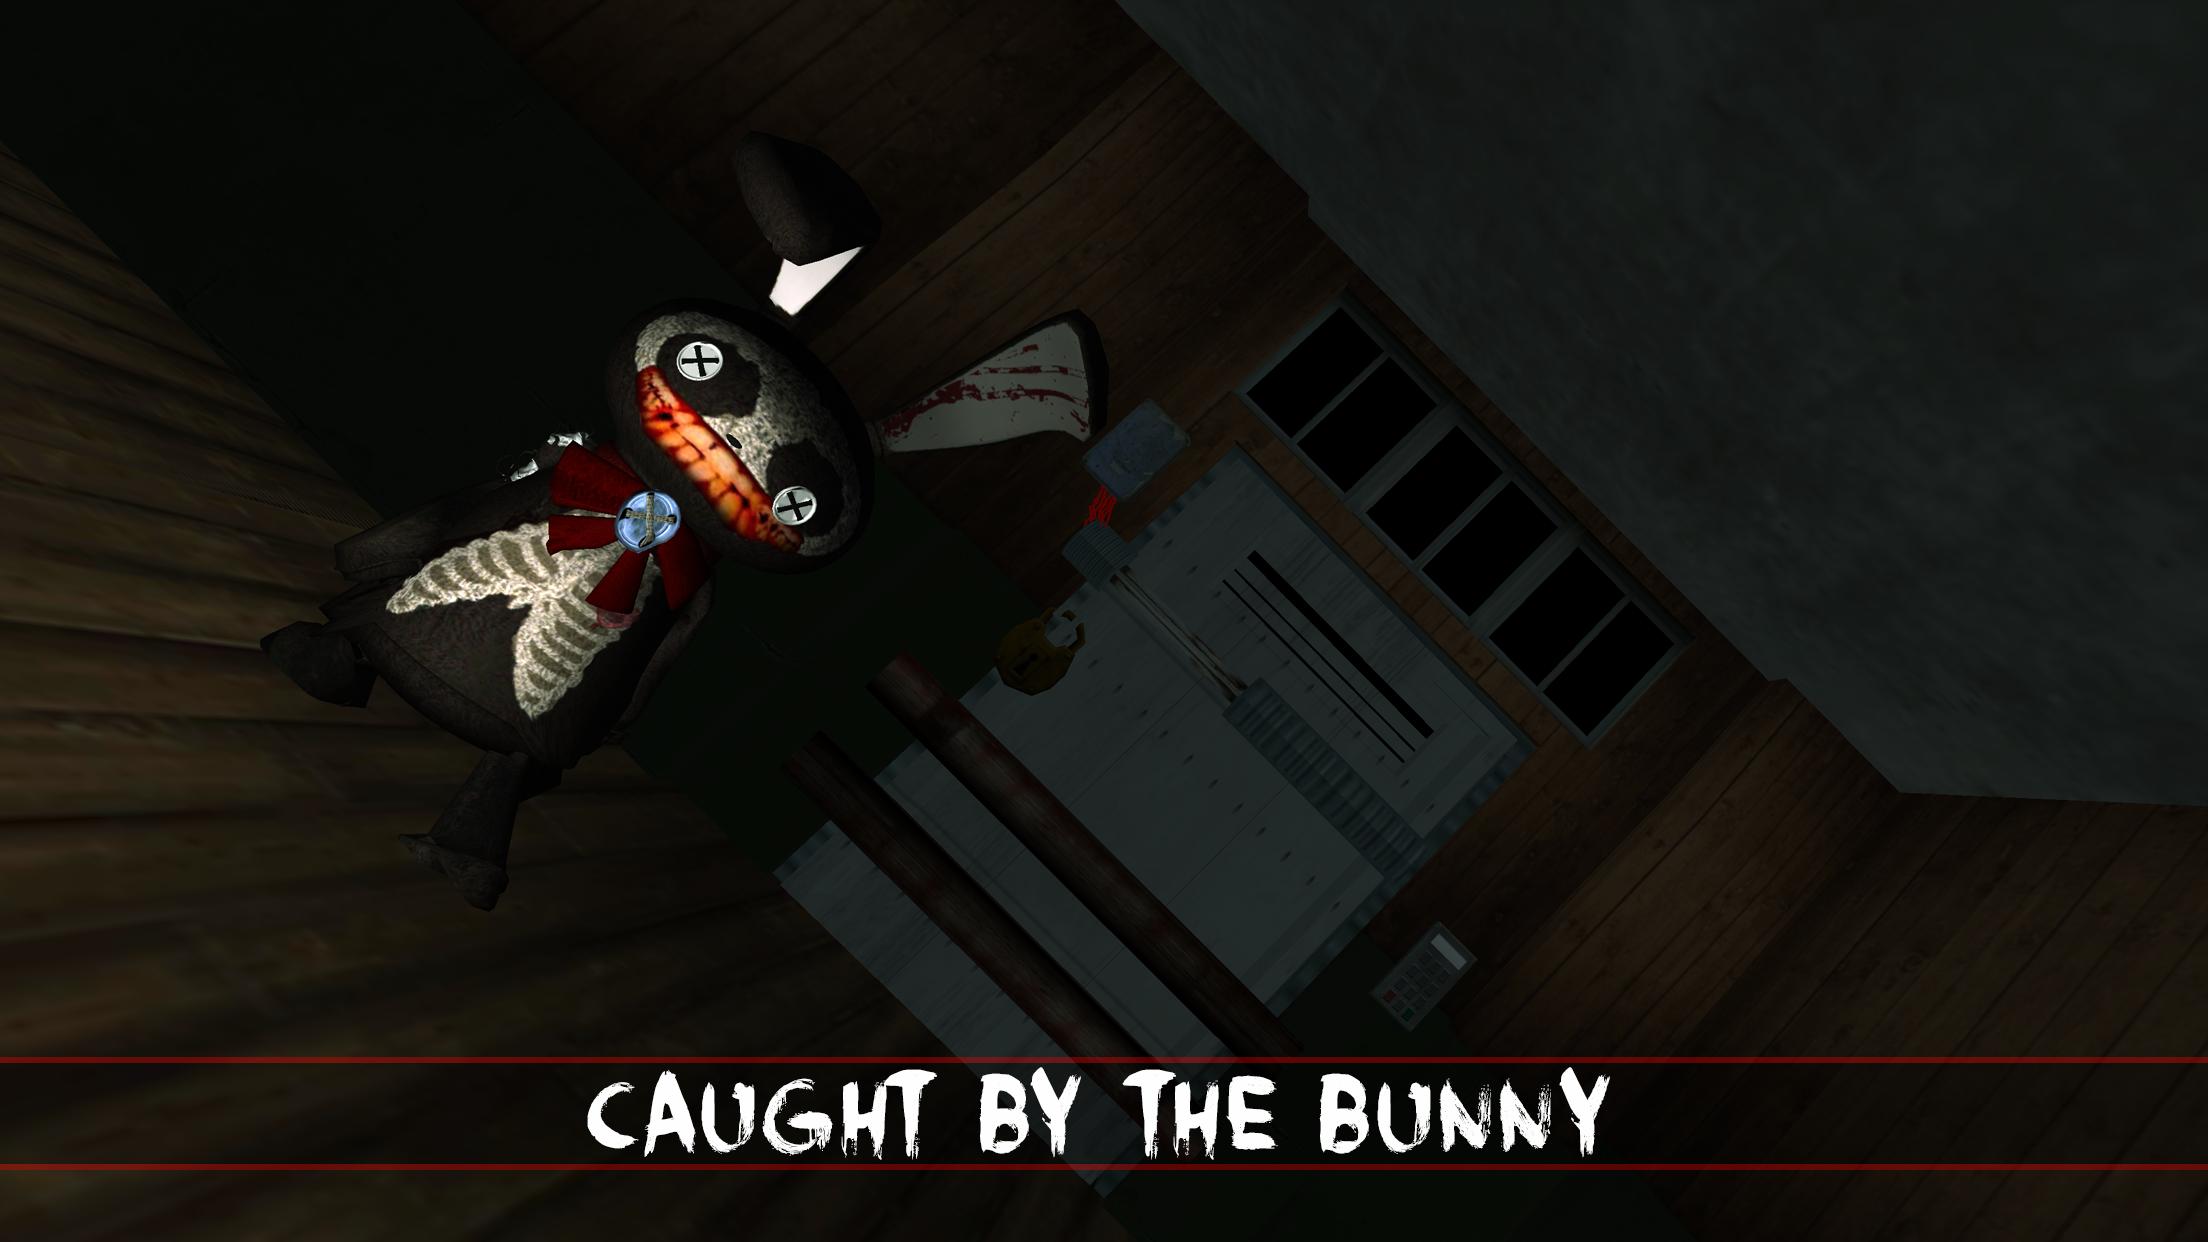 Scary Bunny The Horror Game For Android Apk Download